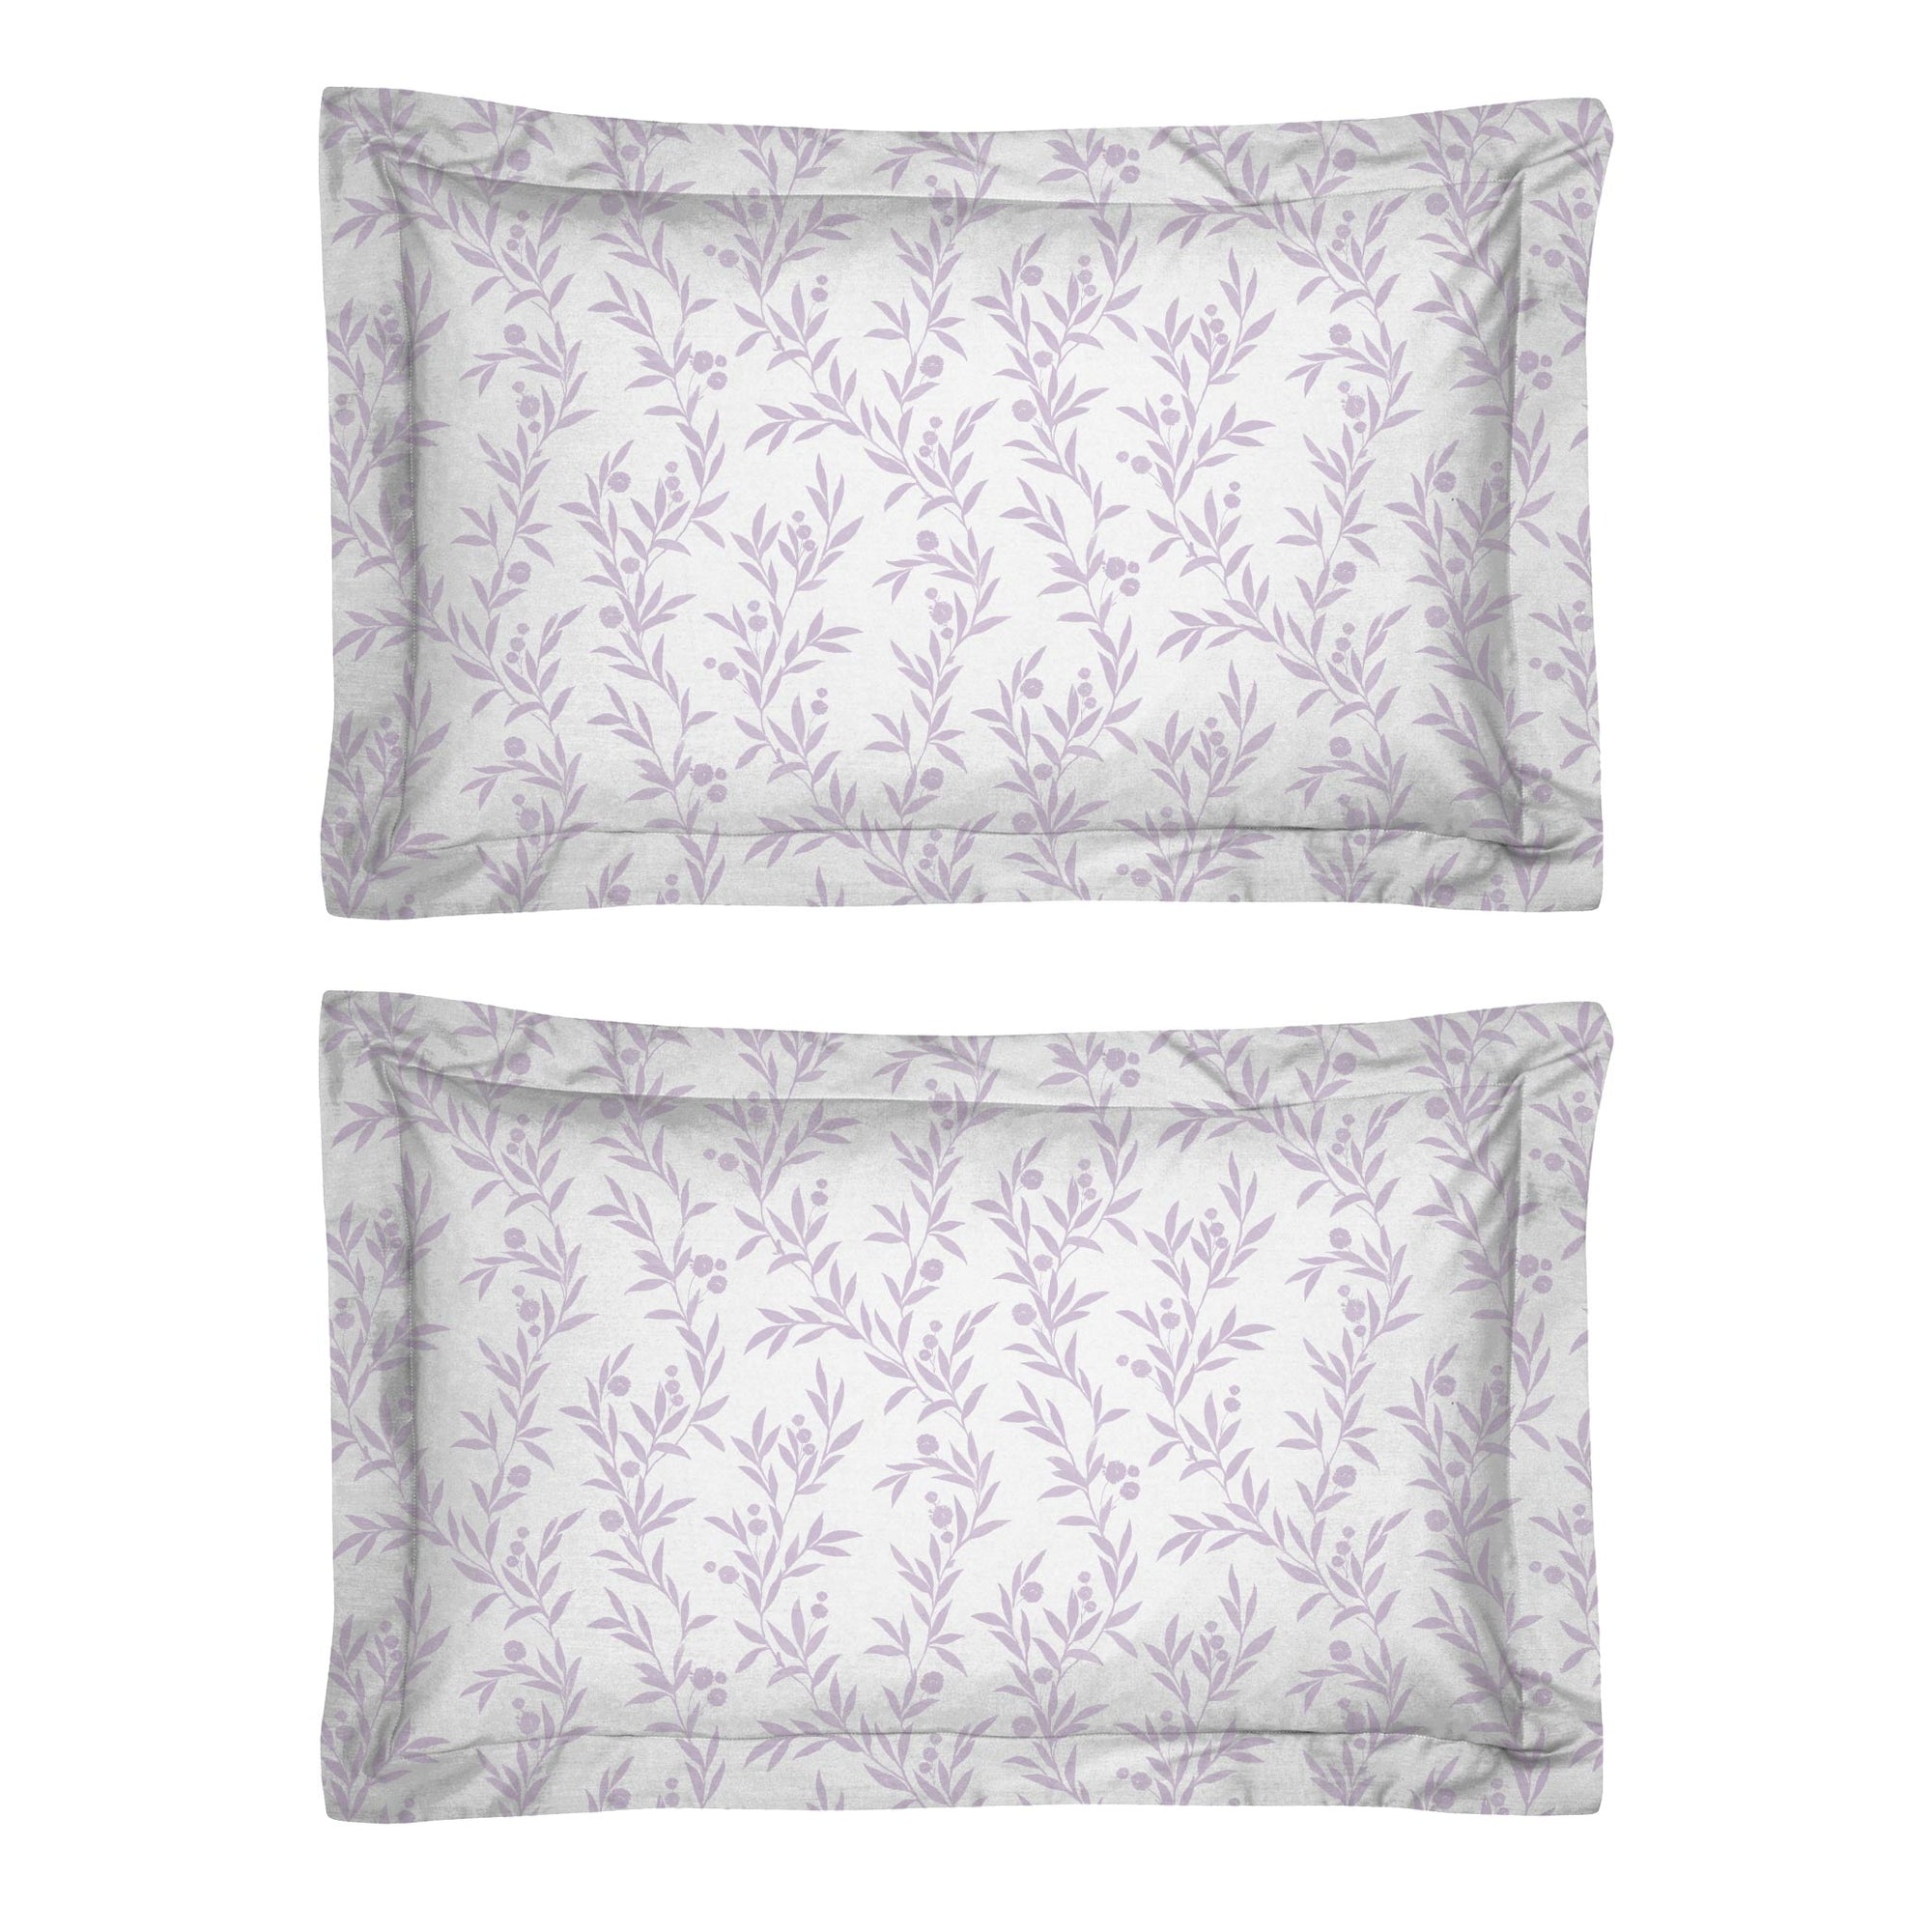 One Pair Pure Lilac Floral 200TC Cotton Percale Oxford Pillowcase